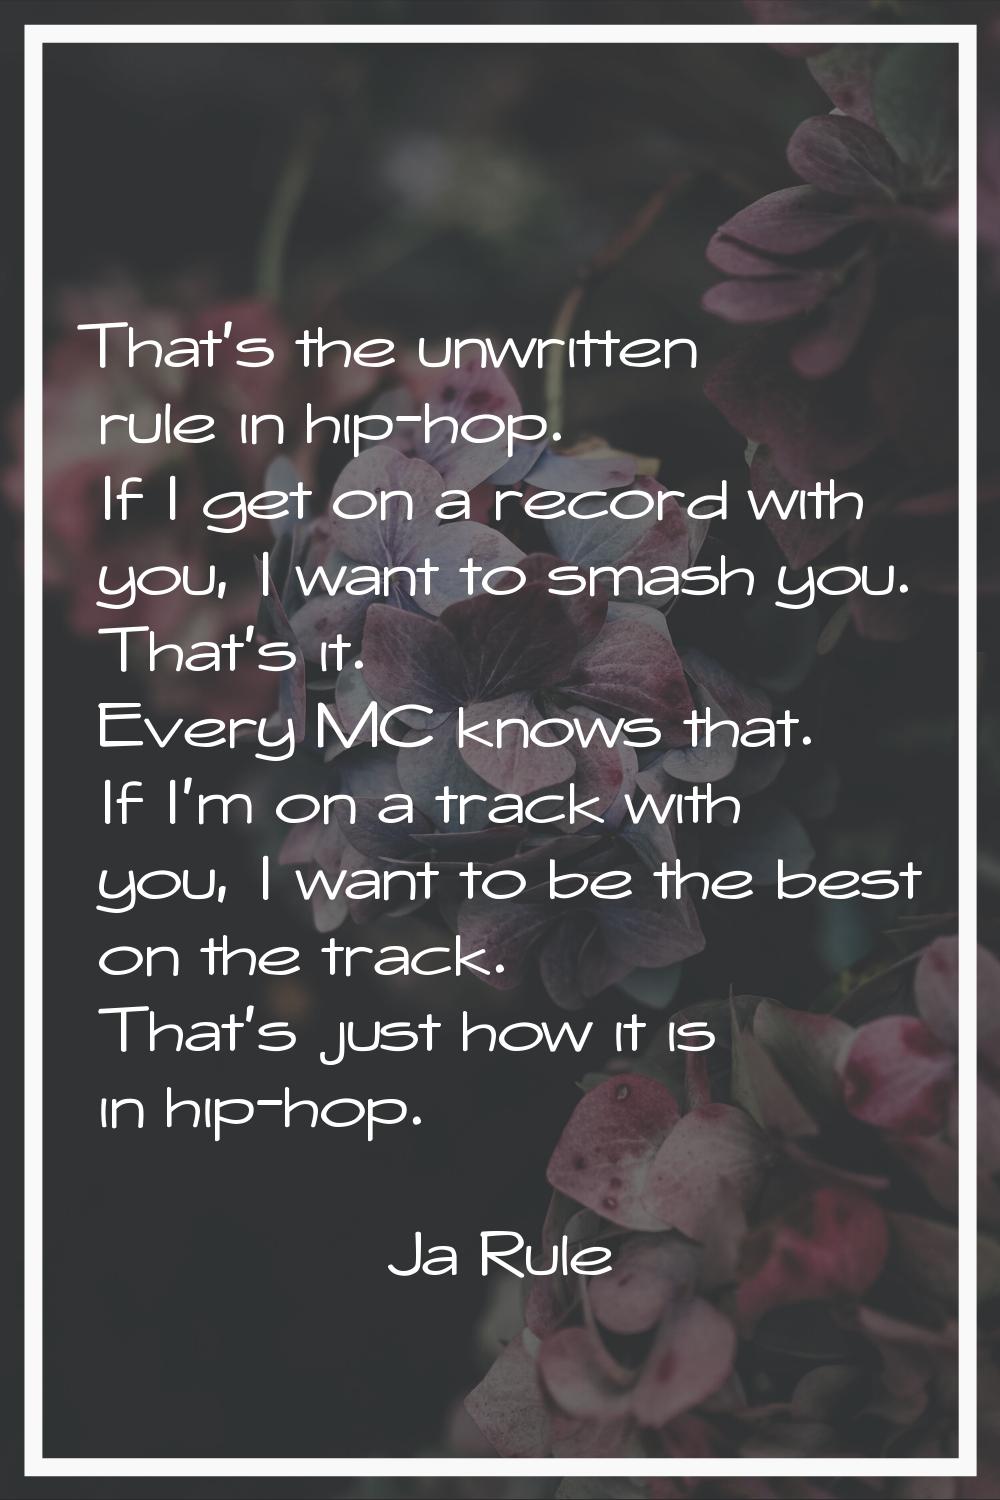 That's the unwritten rule in hip-hop. If I get on a record with you, I want to smash you. That's it